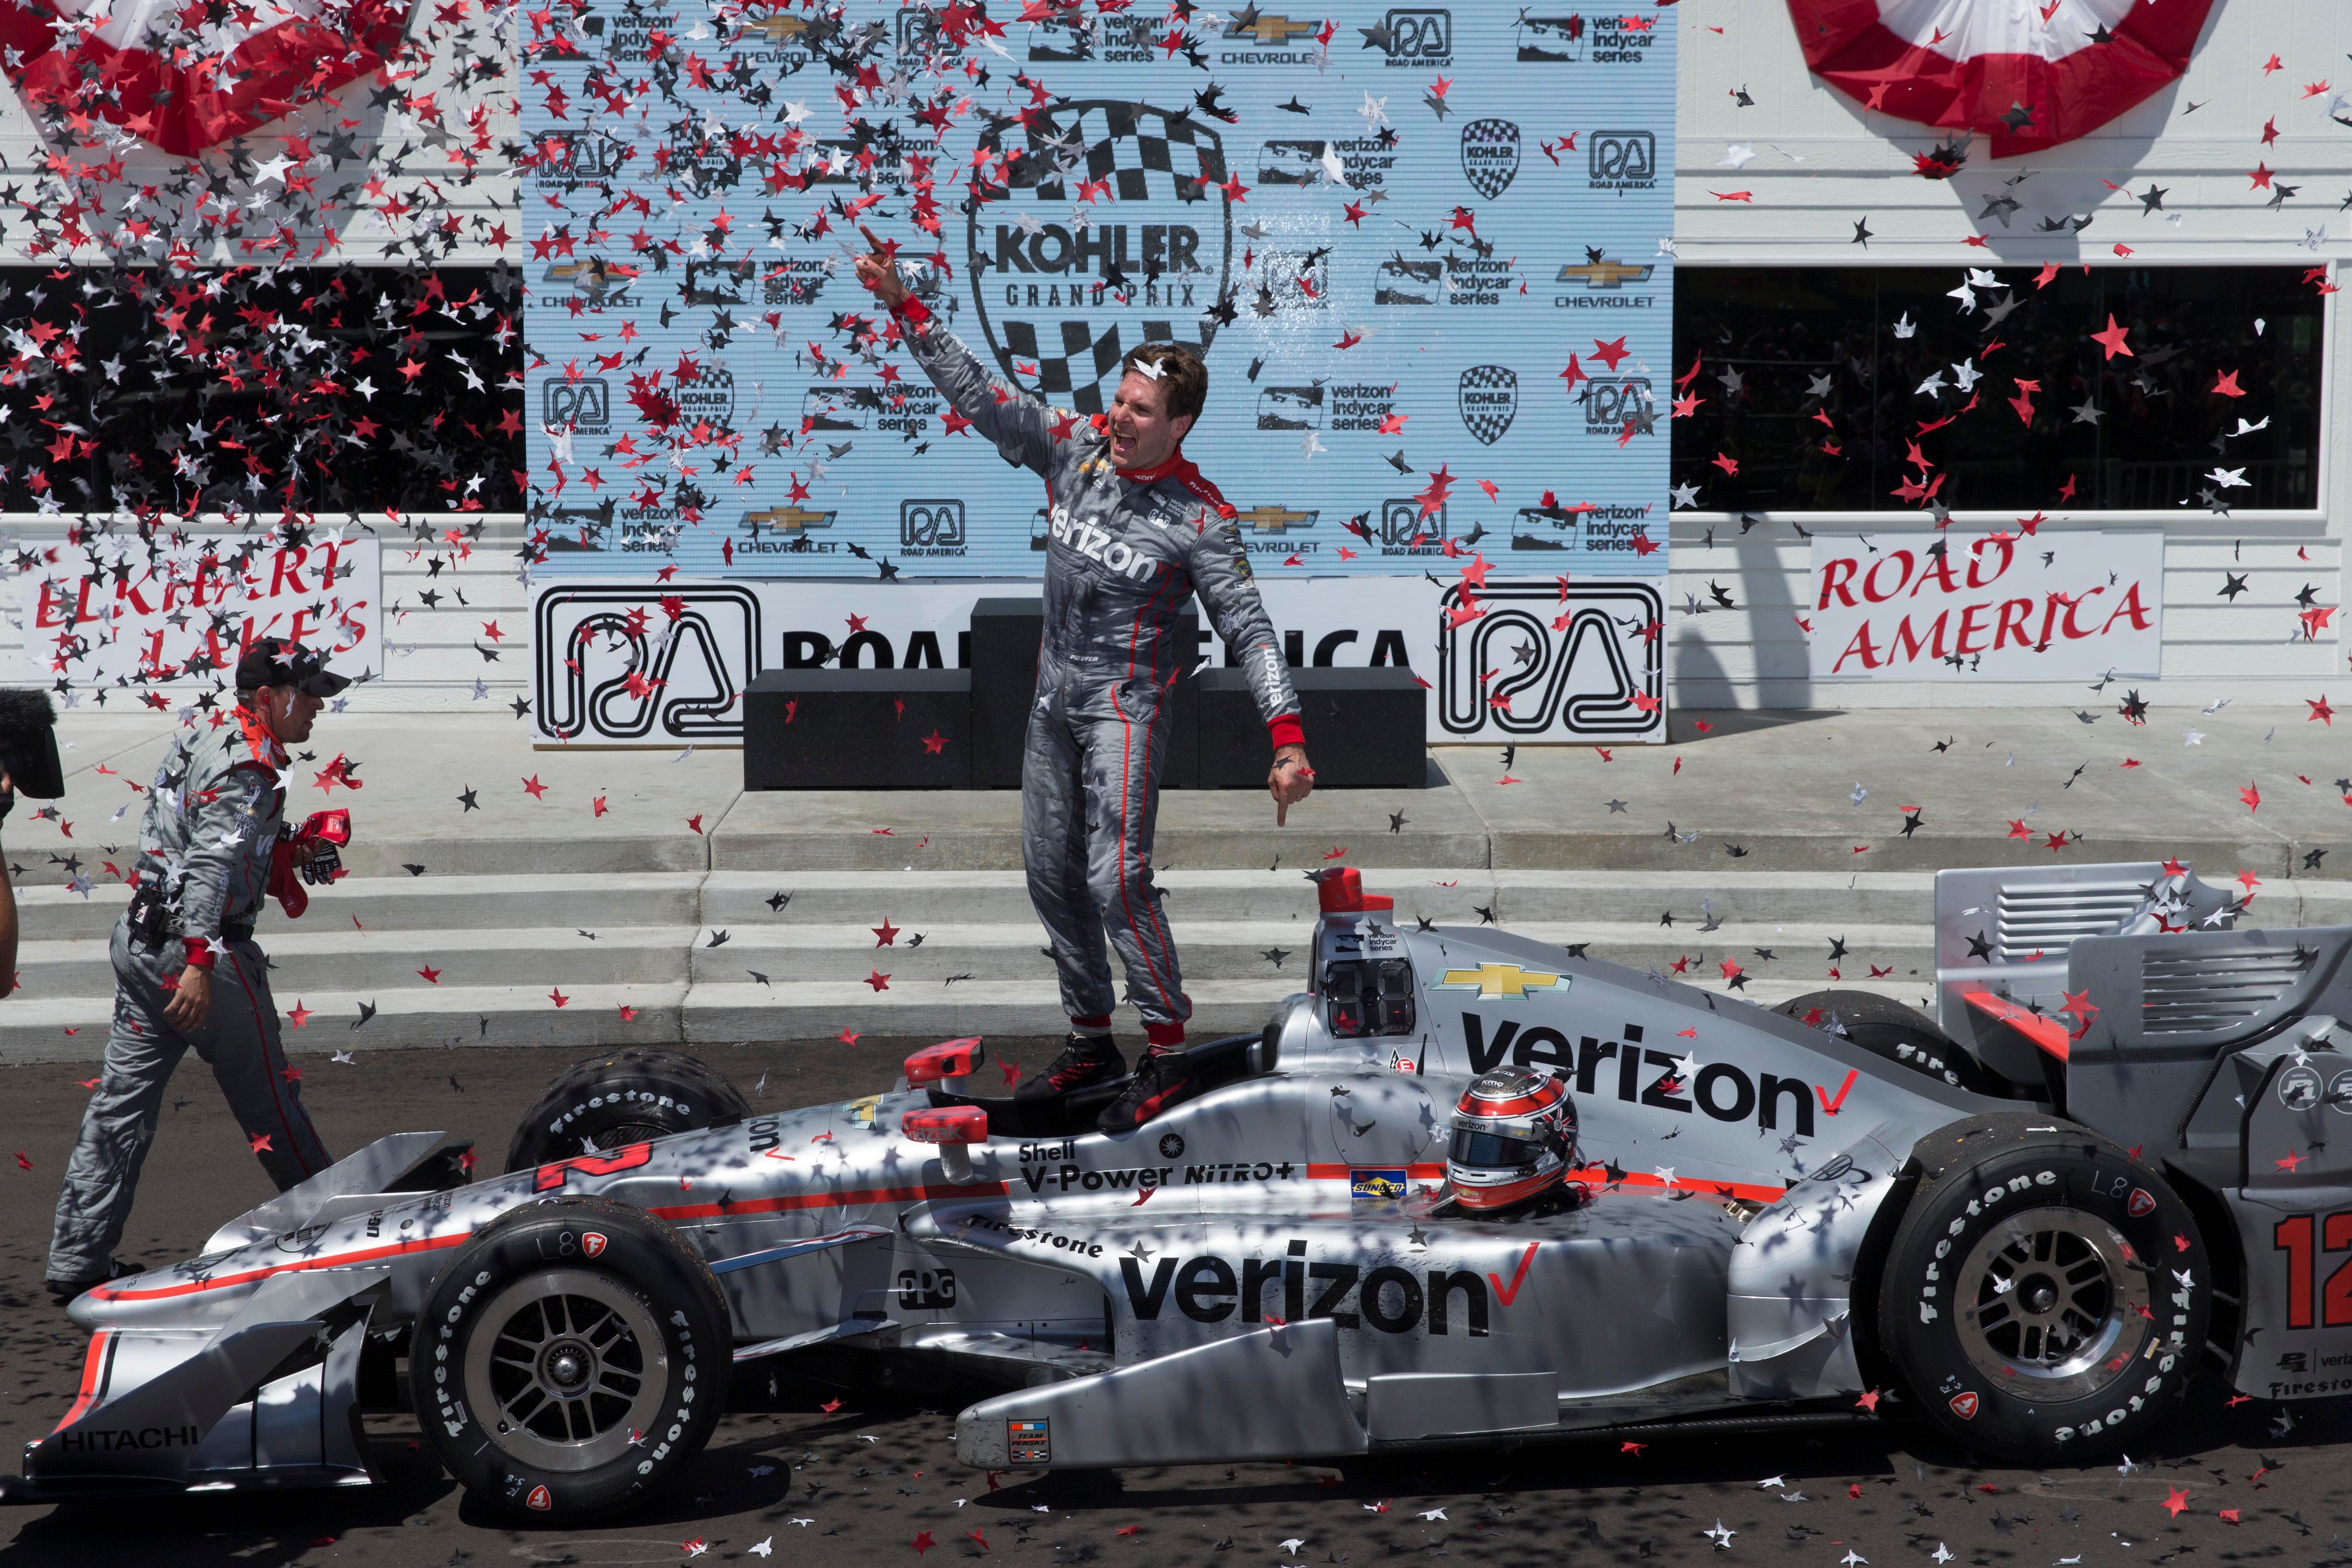 From celebration to excruciating stress, Will Power has experienced more at Road America than most